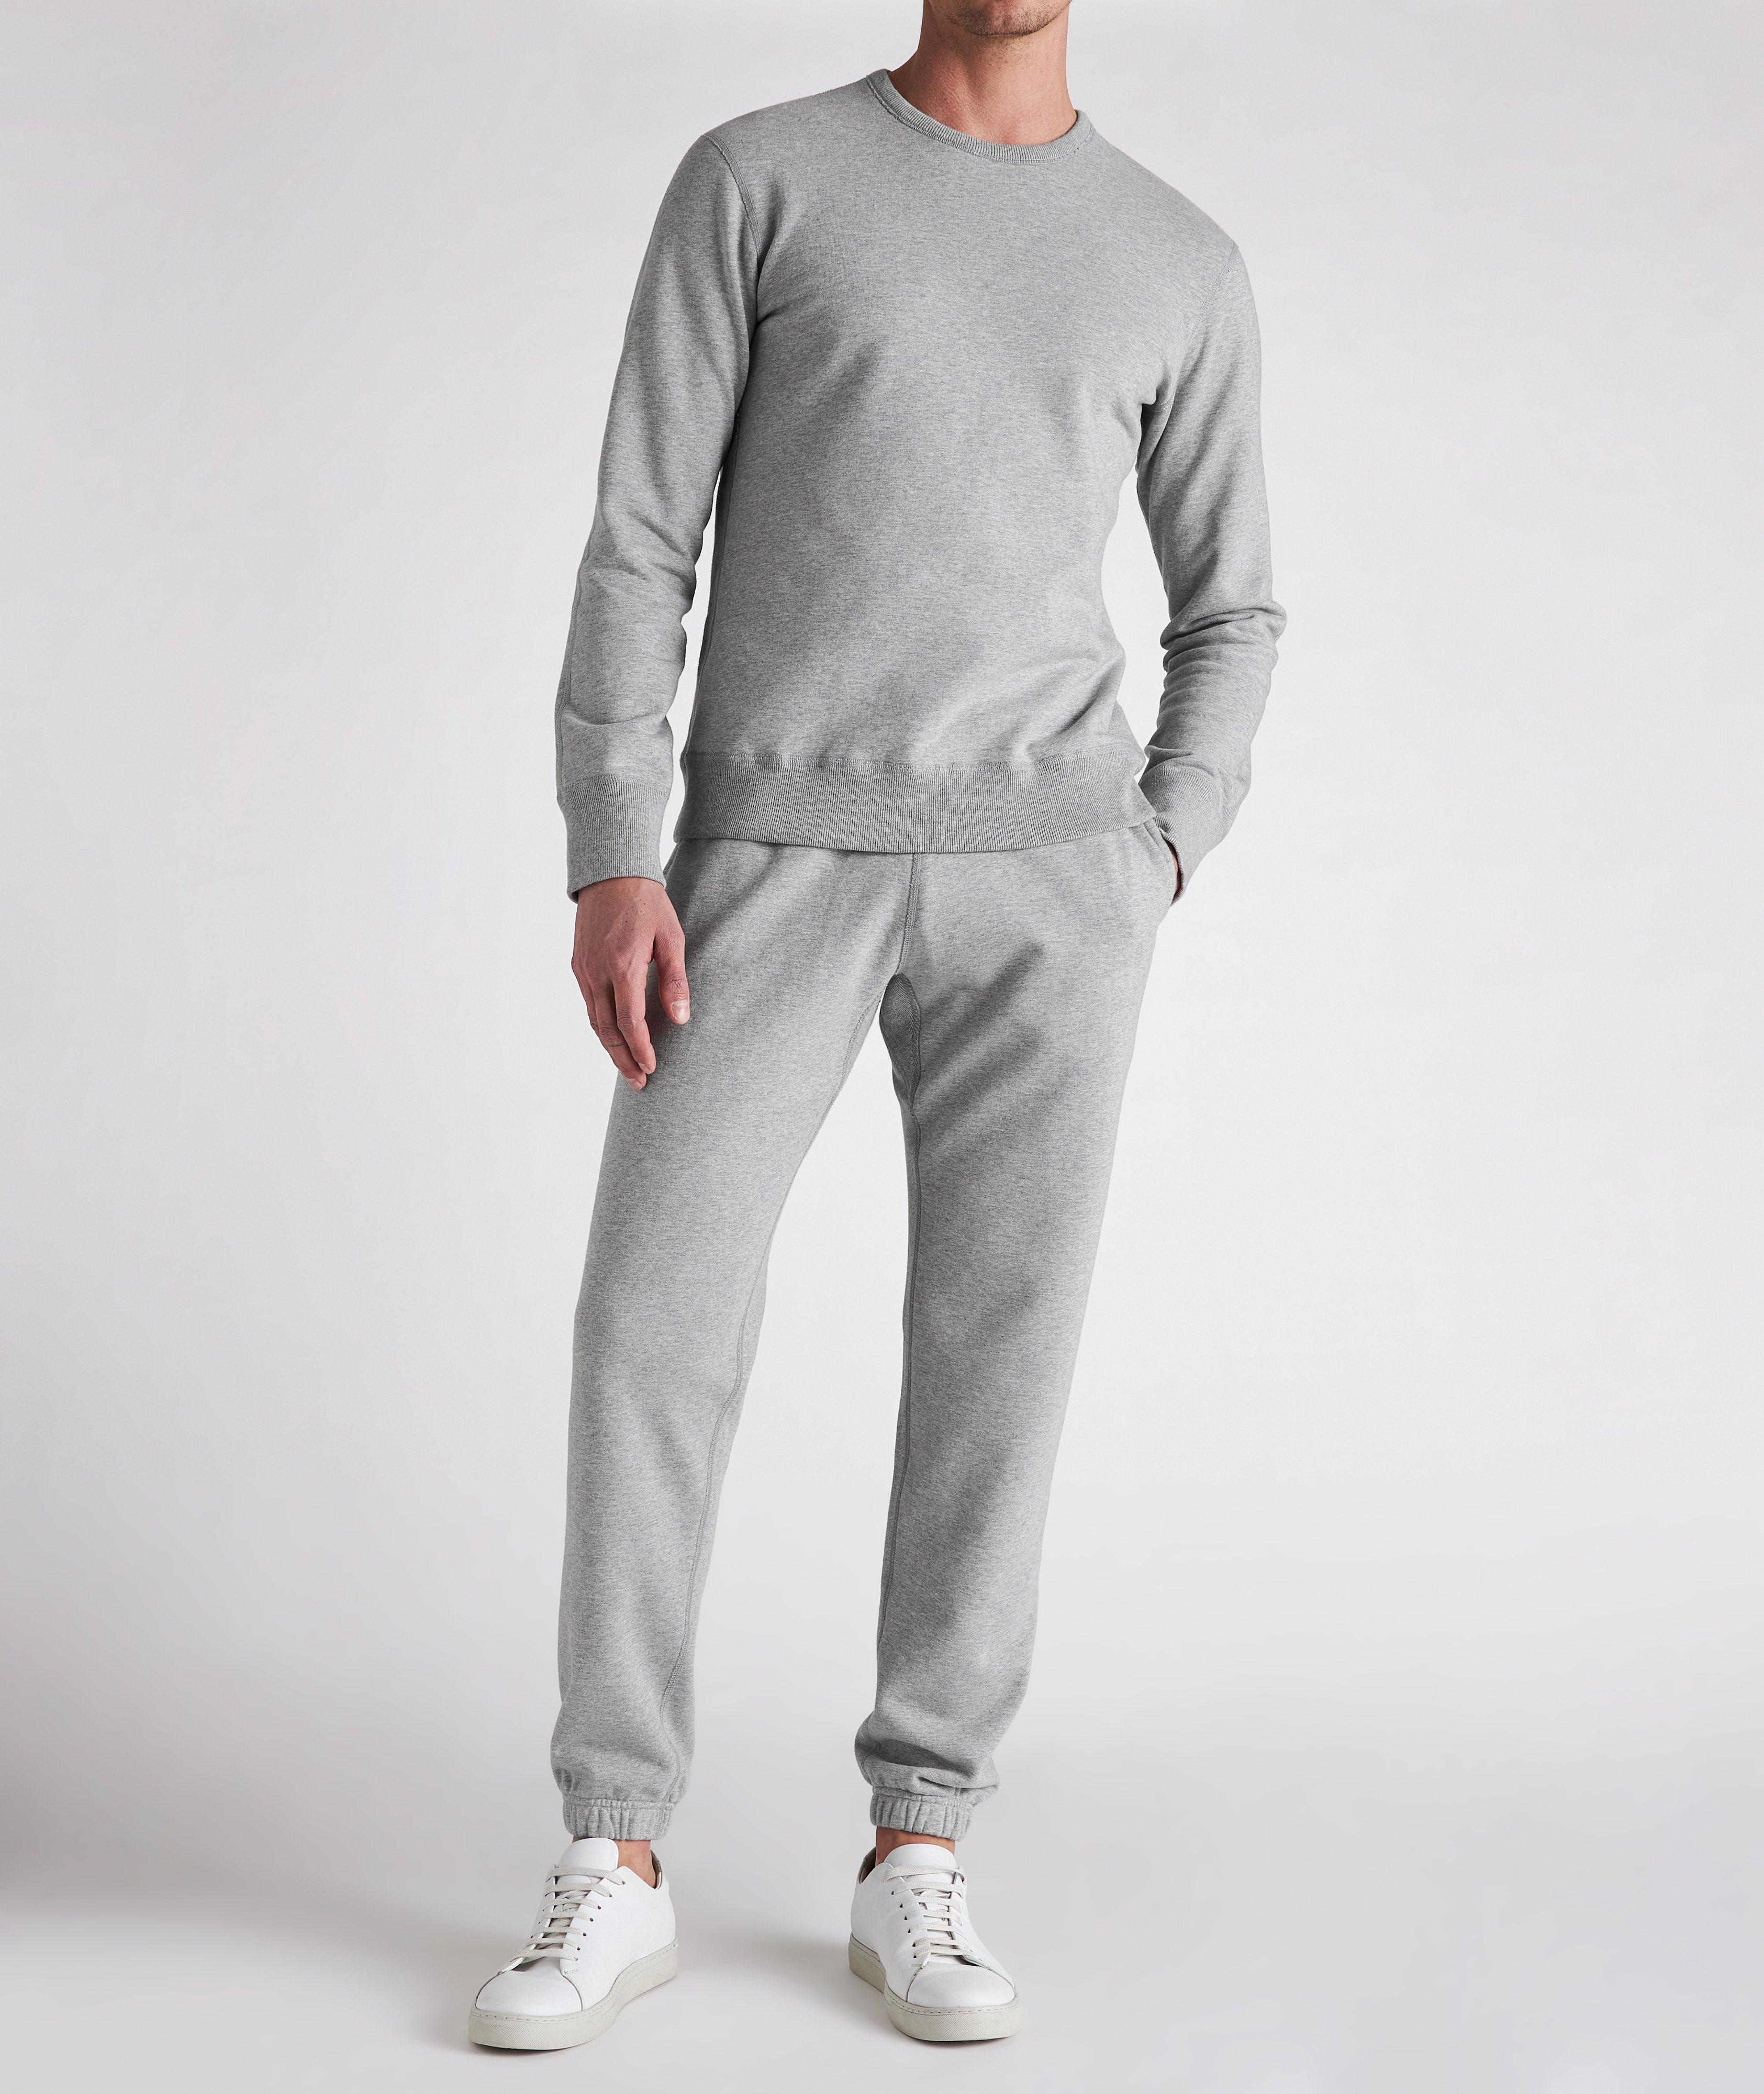 Reigning Champ Midweight Terry Crewneck, Sweaters & Knits